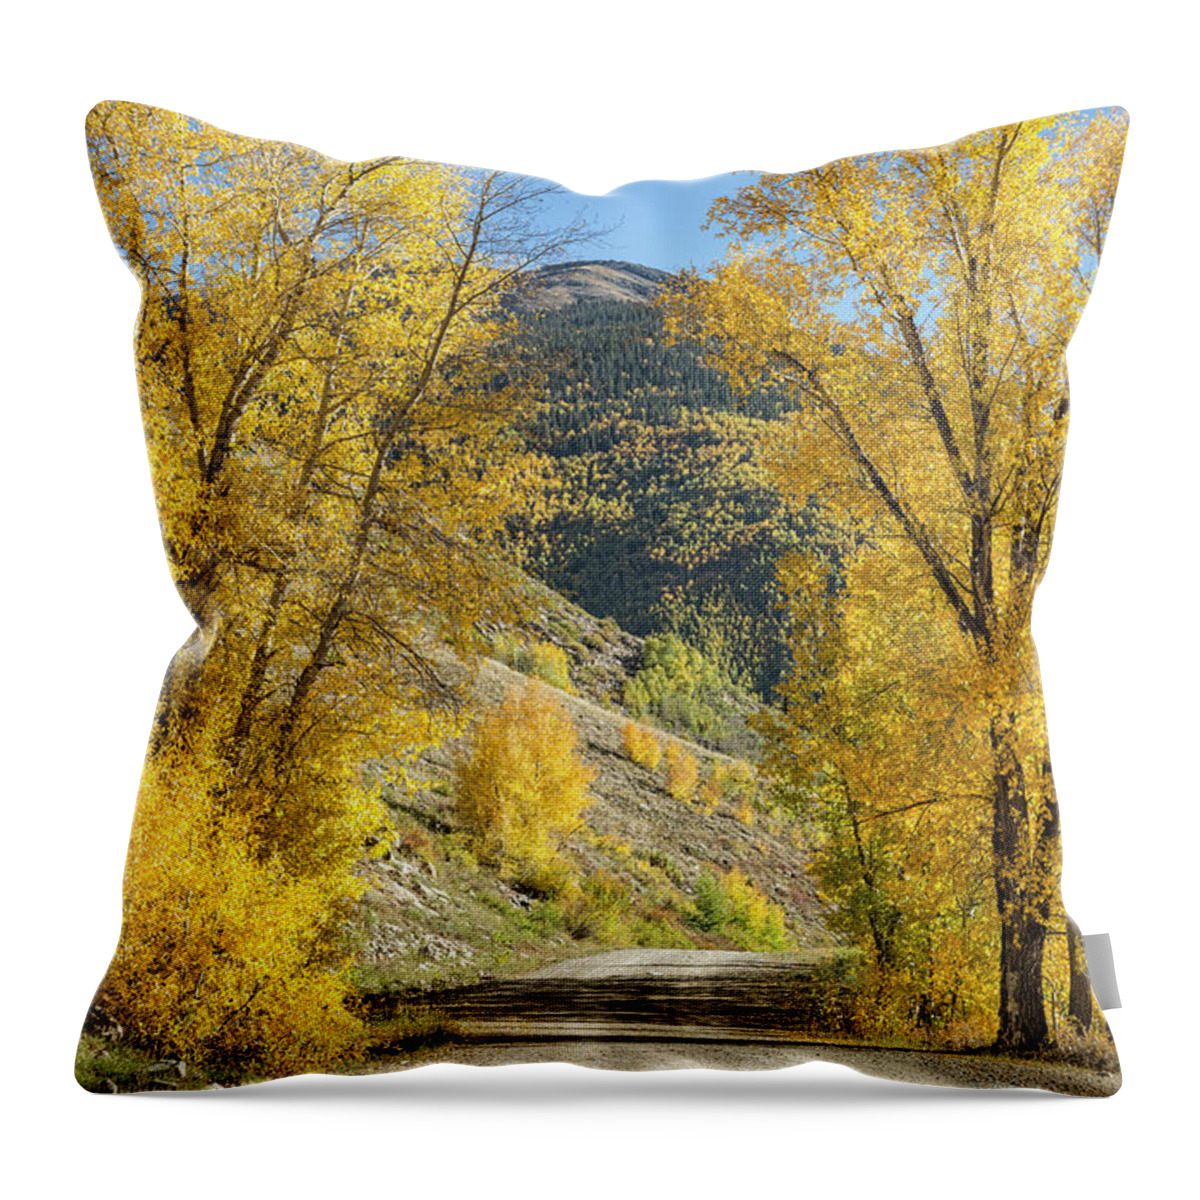 Colorado Throw Pillow featuring the photograph Autumn Passage by Denise Bush